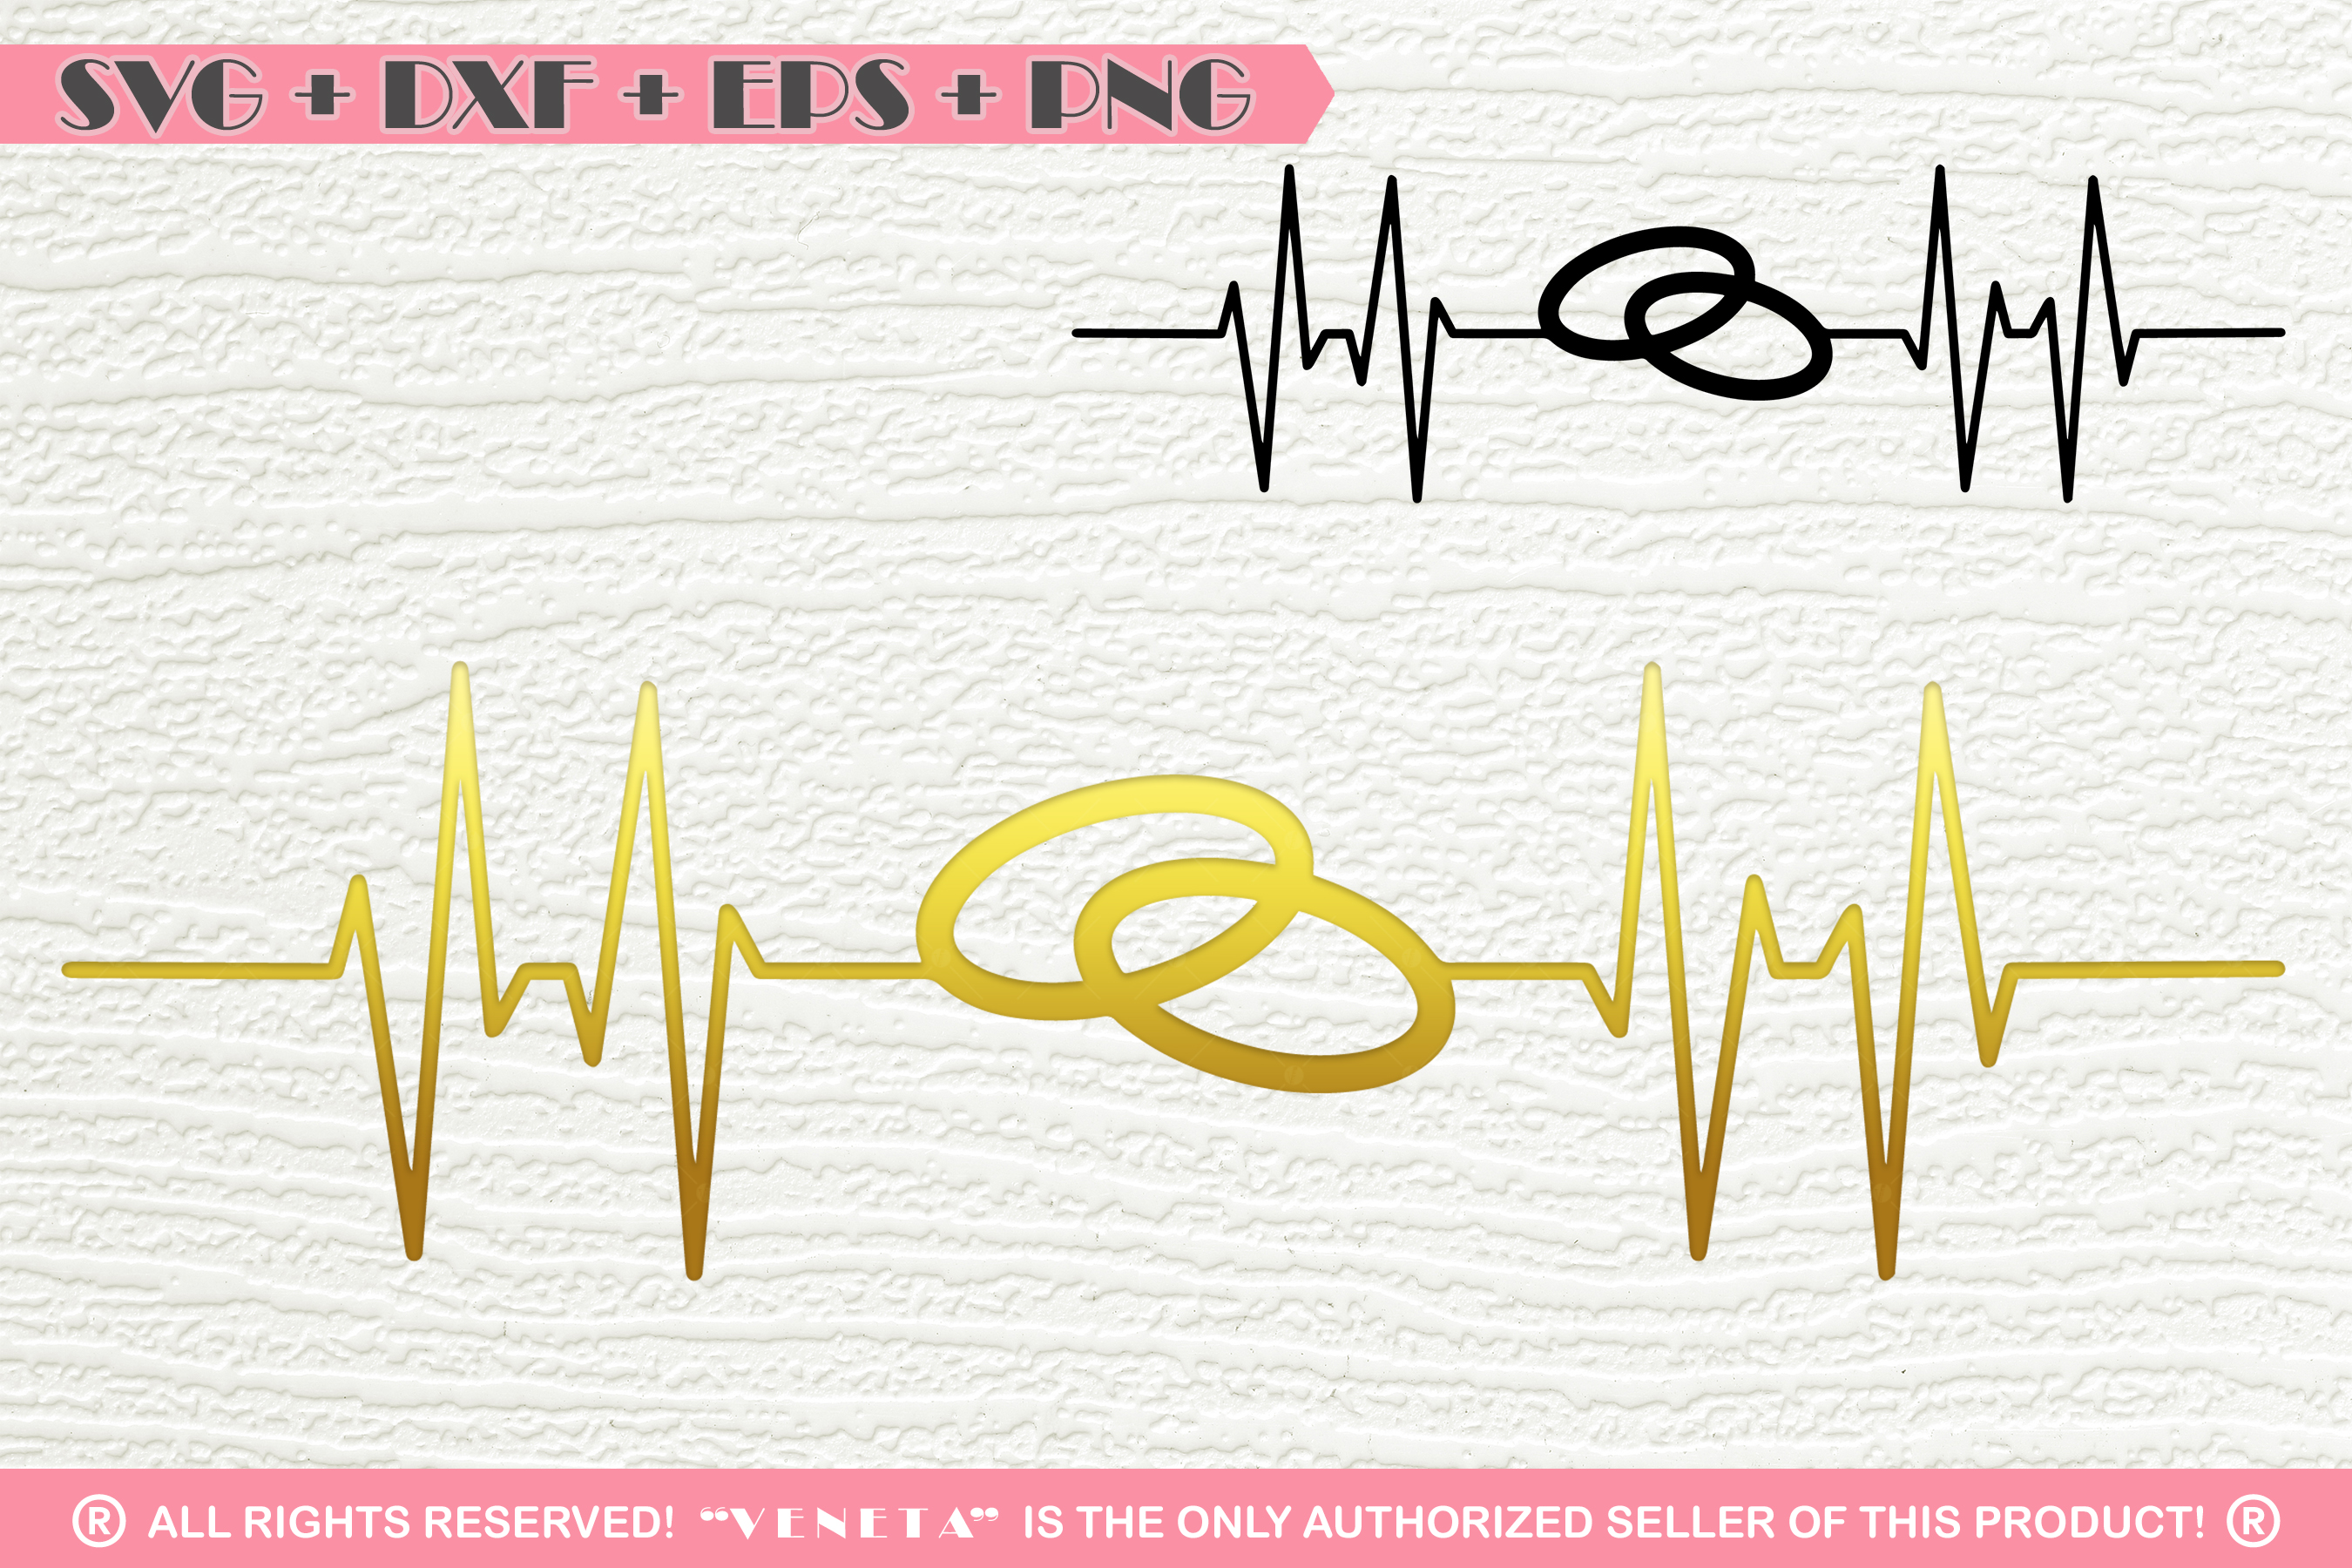 Wedding rings | Hearbeat | EKG |SVG DXF PNG EPS Cutting ...